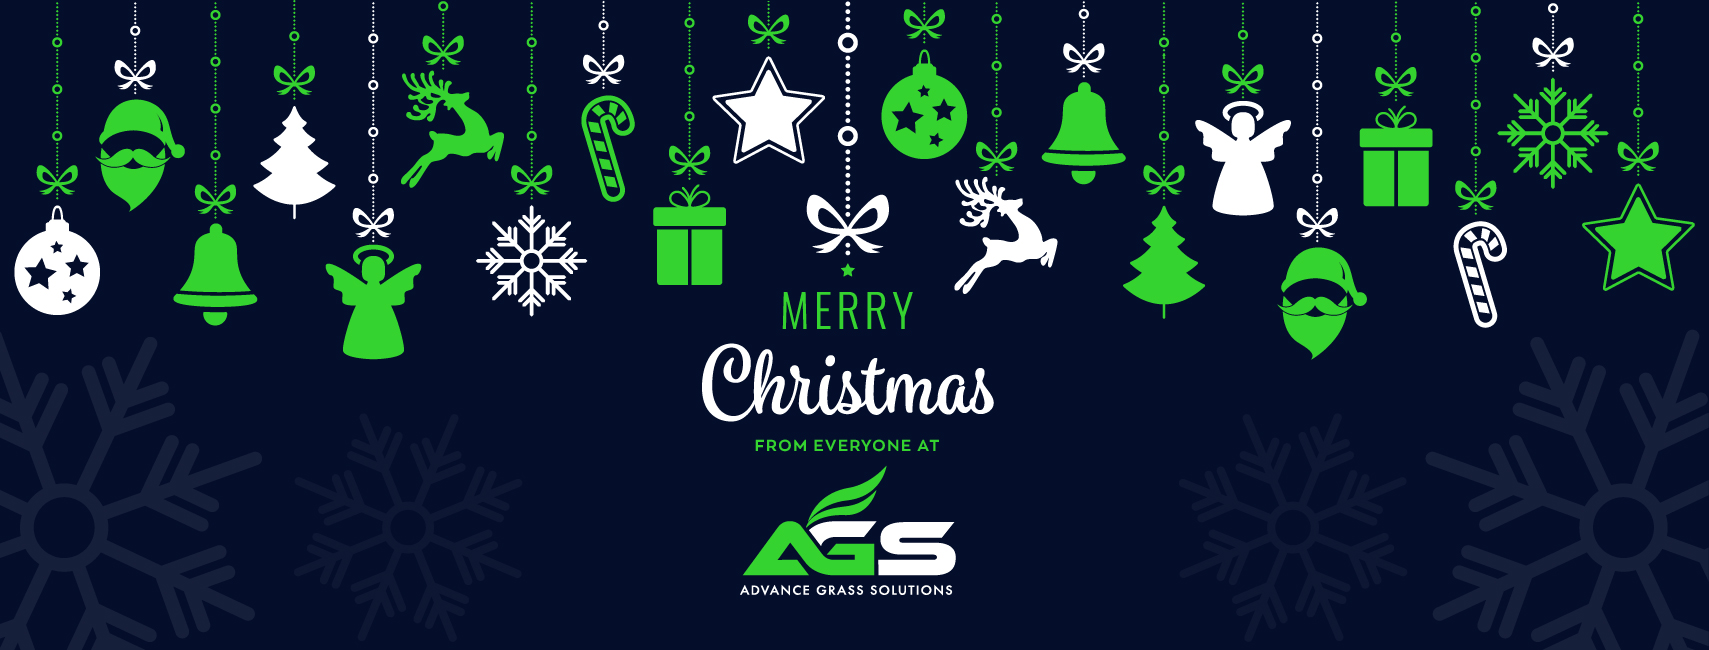 Merry Christmas and Happy New Year from everyone at AGS